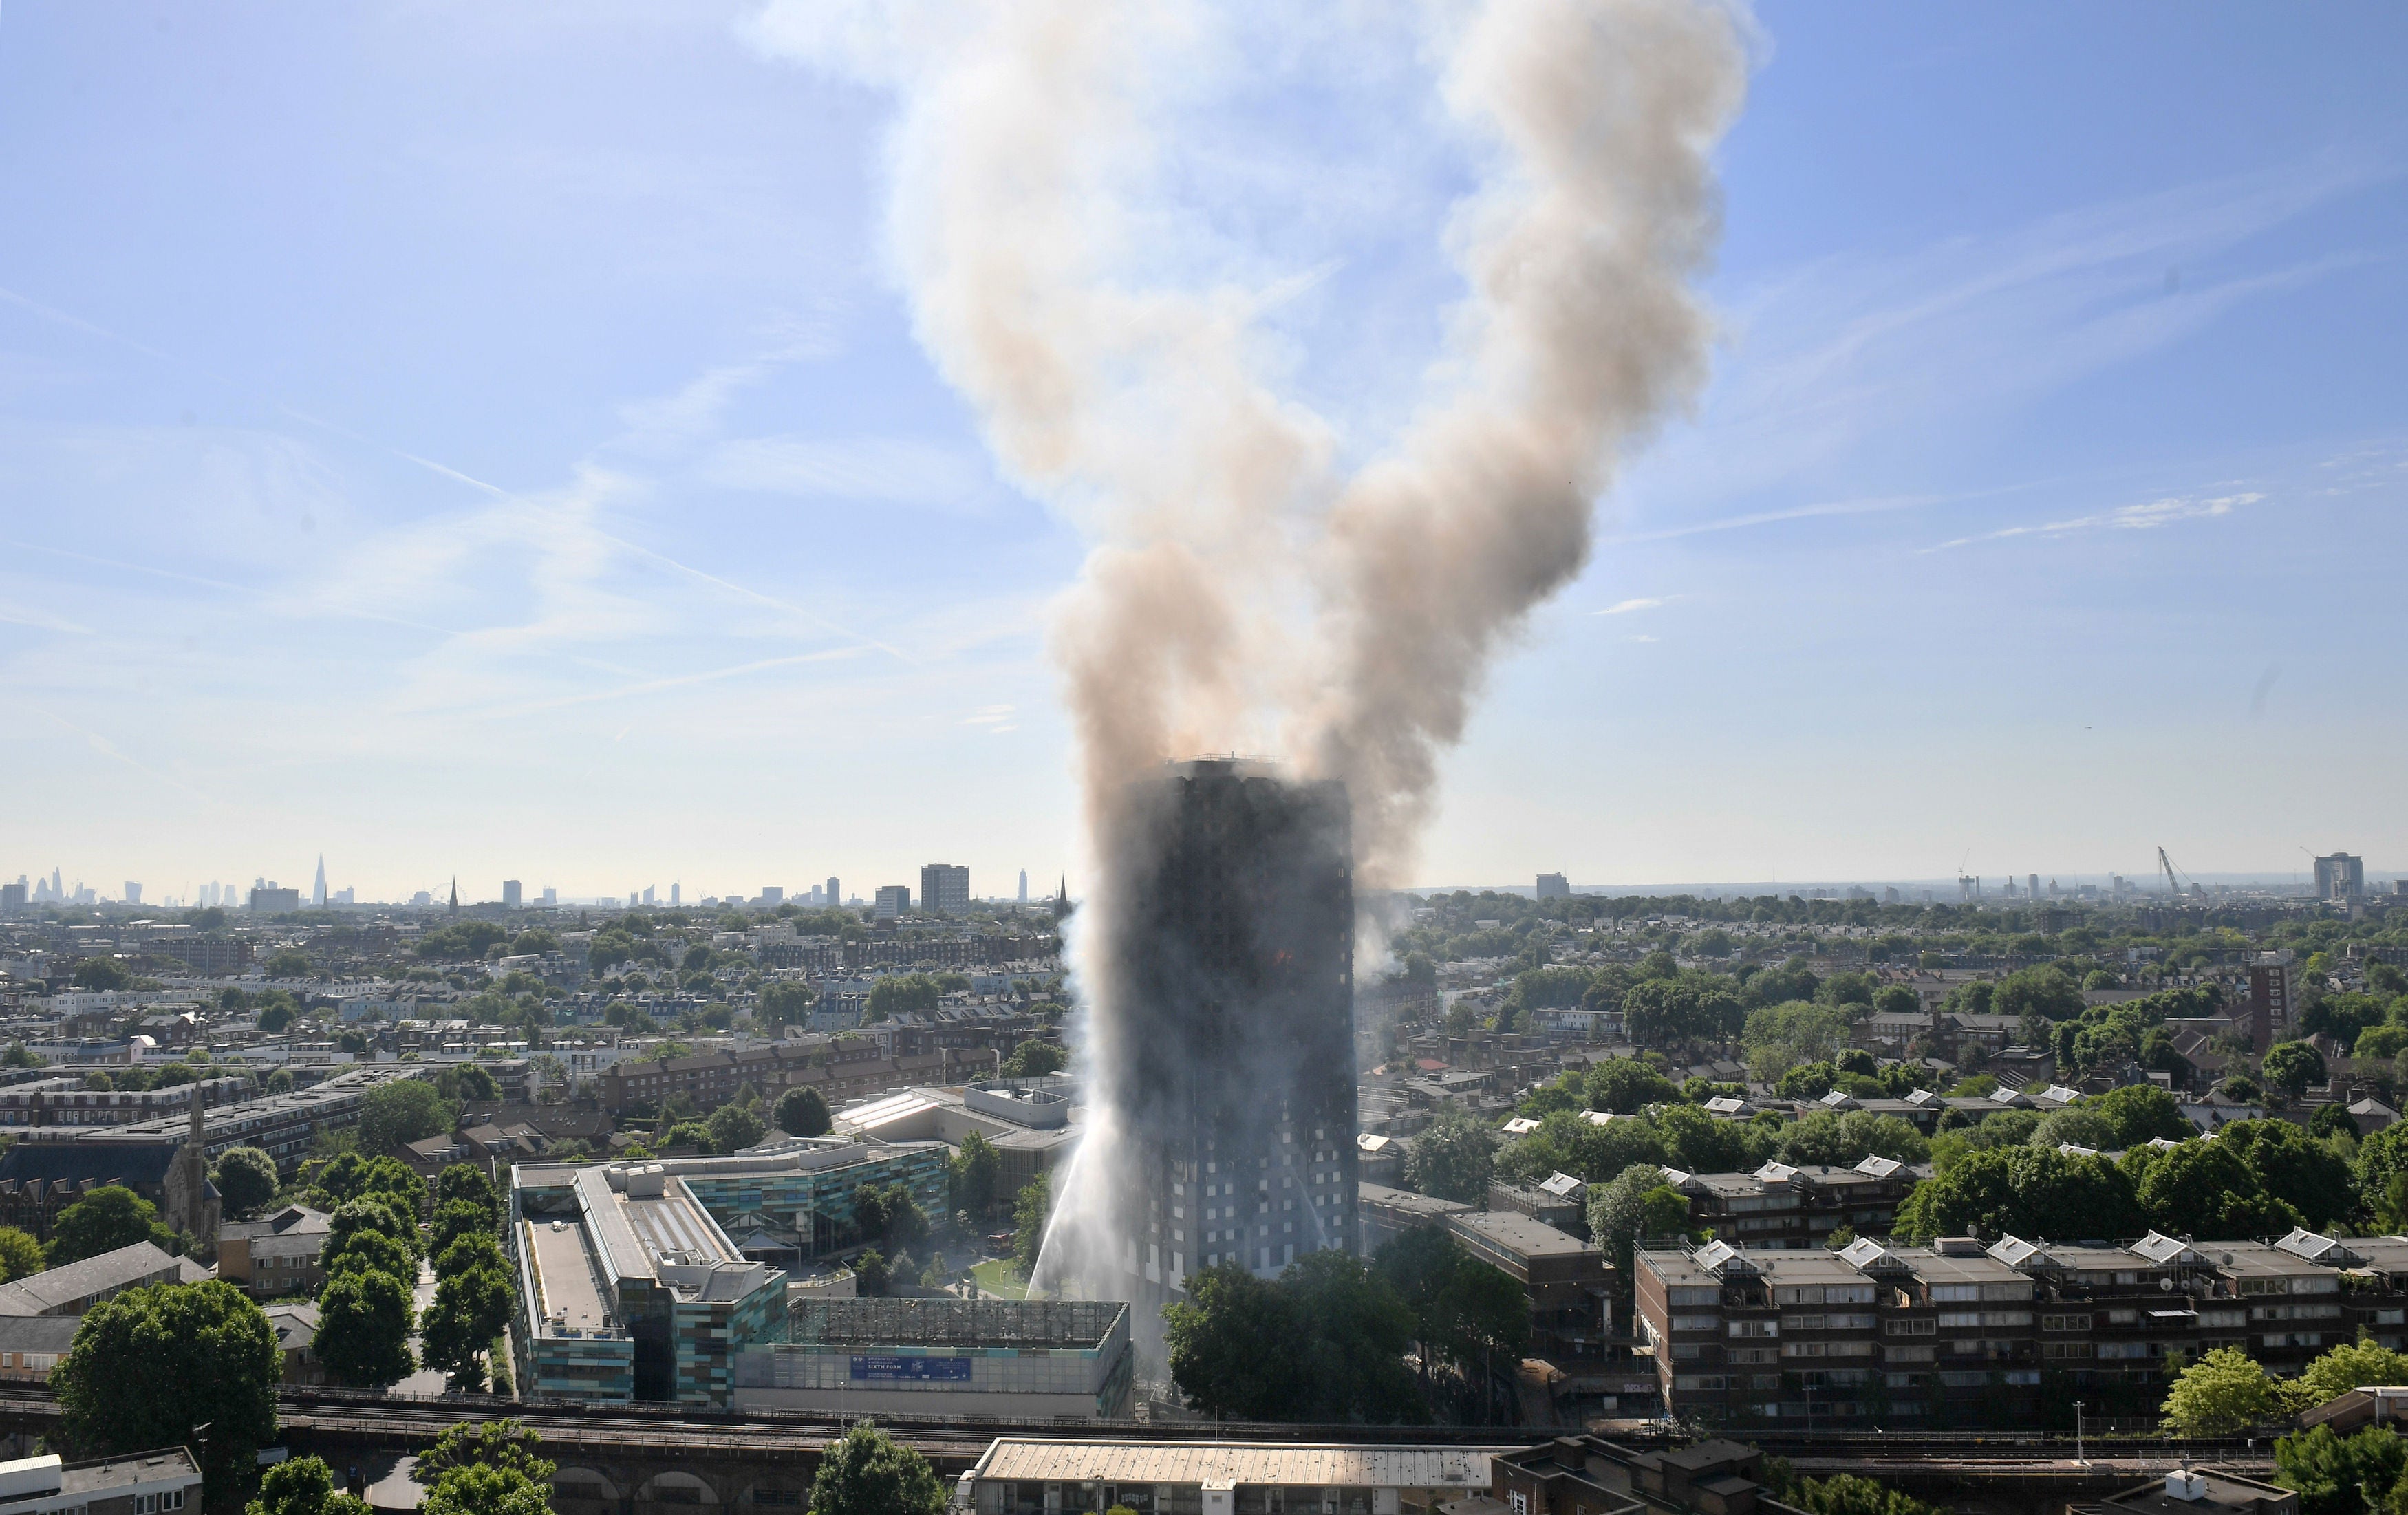 Smoke billowing from the fire that engulfed the 24-storey Grenfell Tower in west London